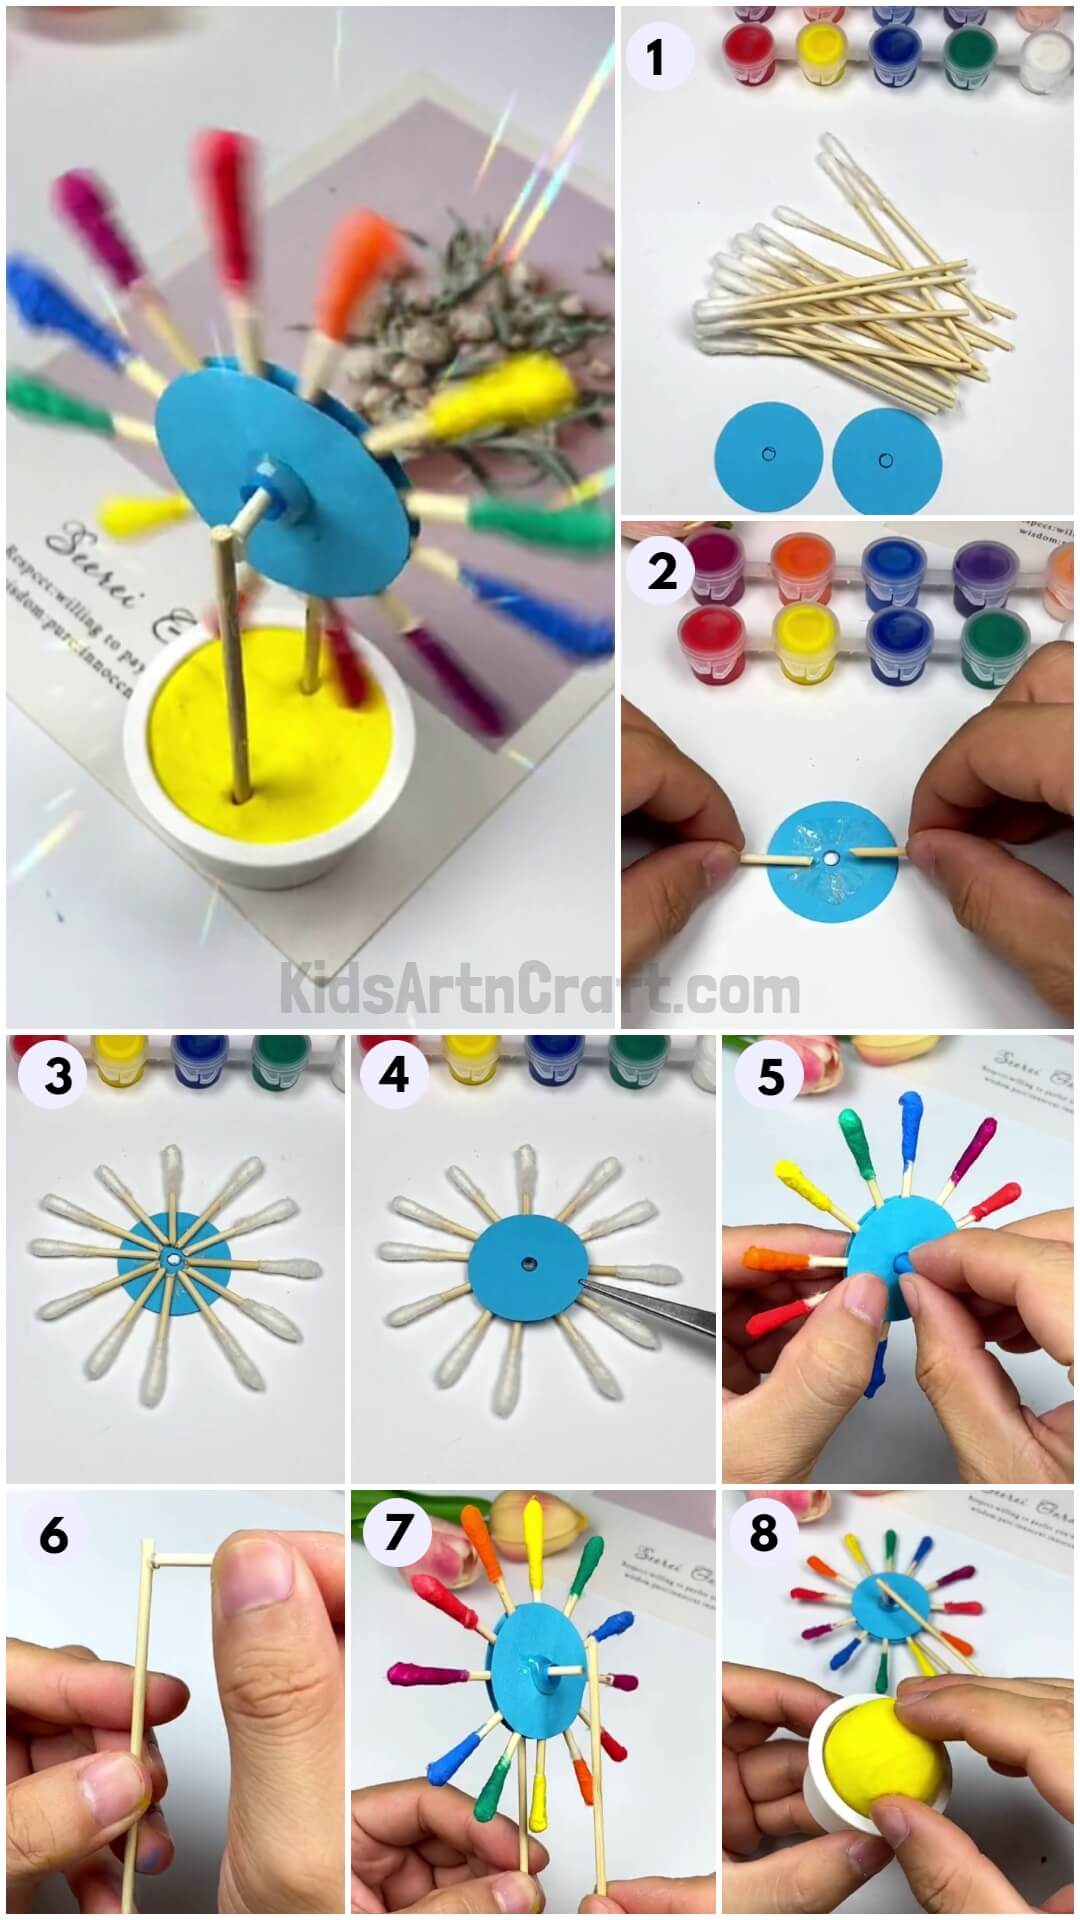 Colorful Cotton Earbud Windmill Craft Tutorial For Beginners